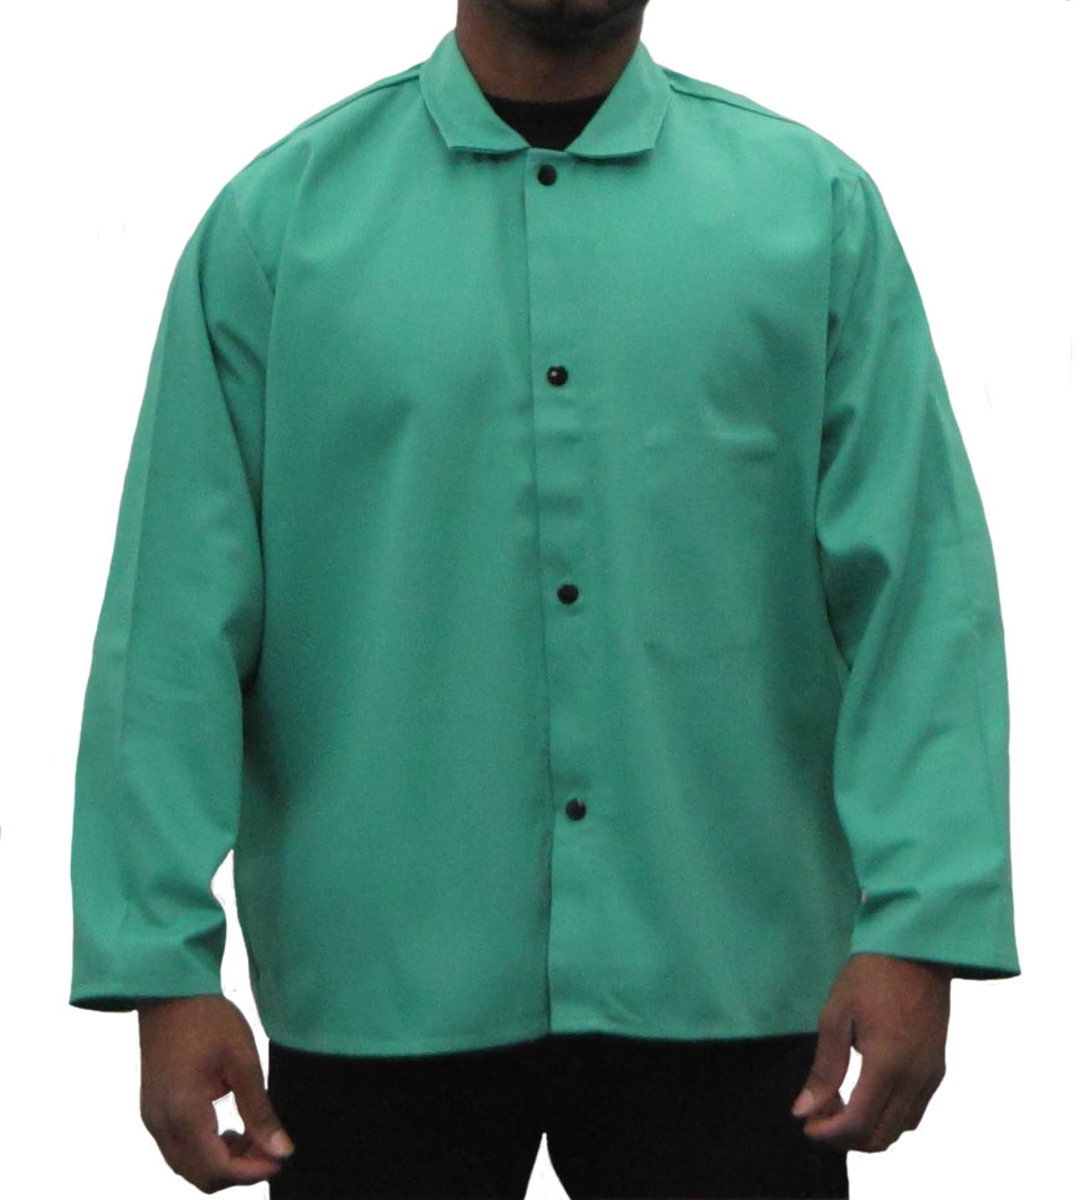 Stanco Safety Products™ Size 6X Green Cotton Flame Resistant Welding Jacket With Snap Closure